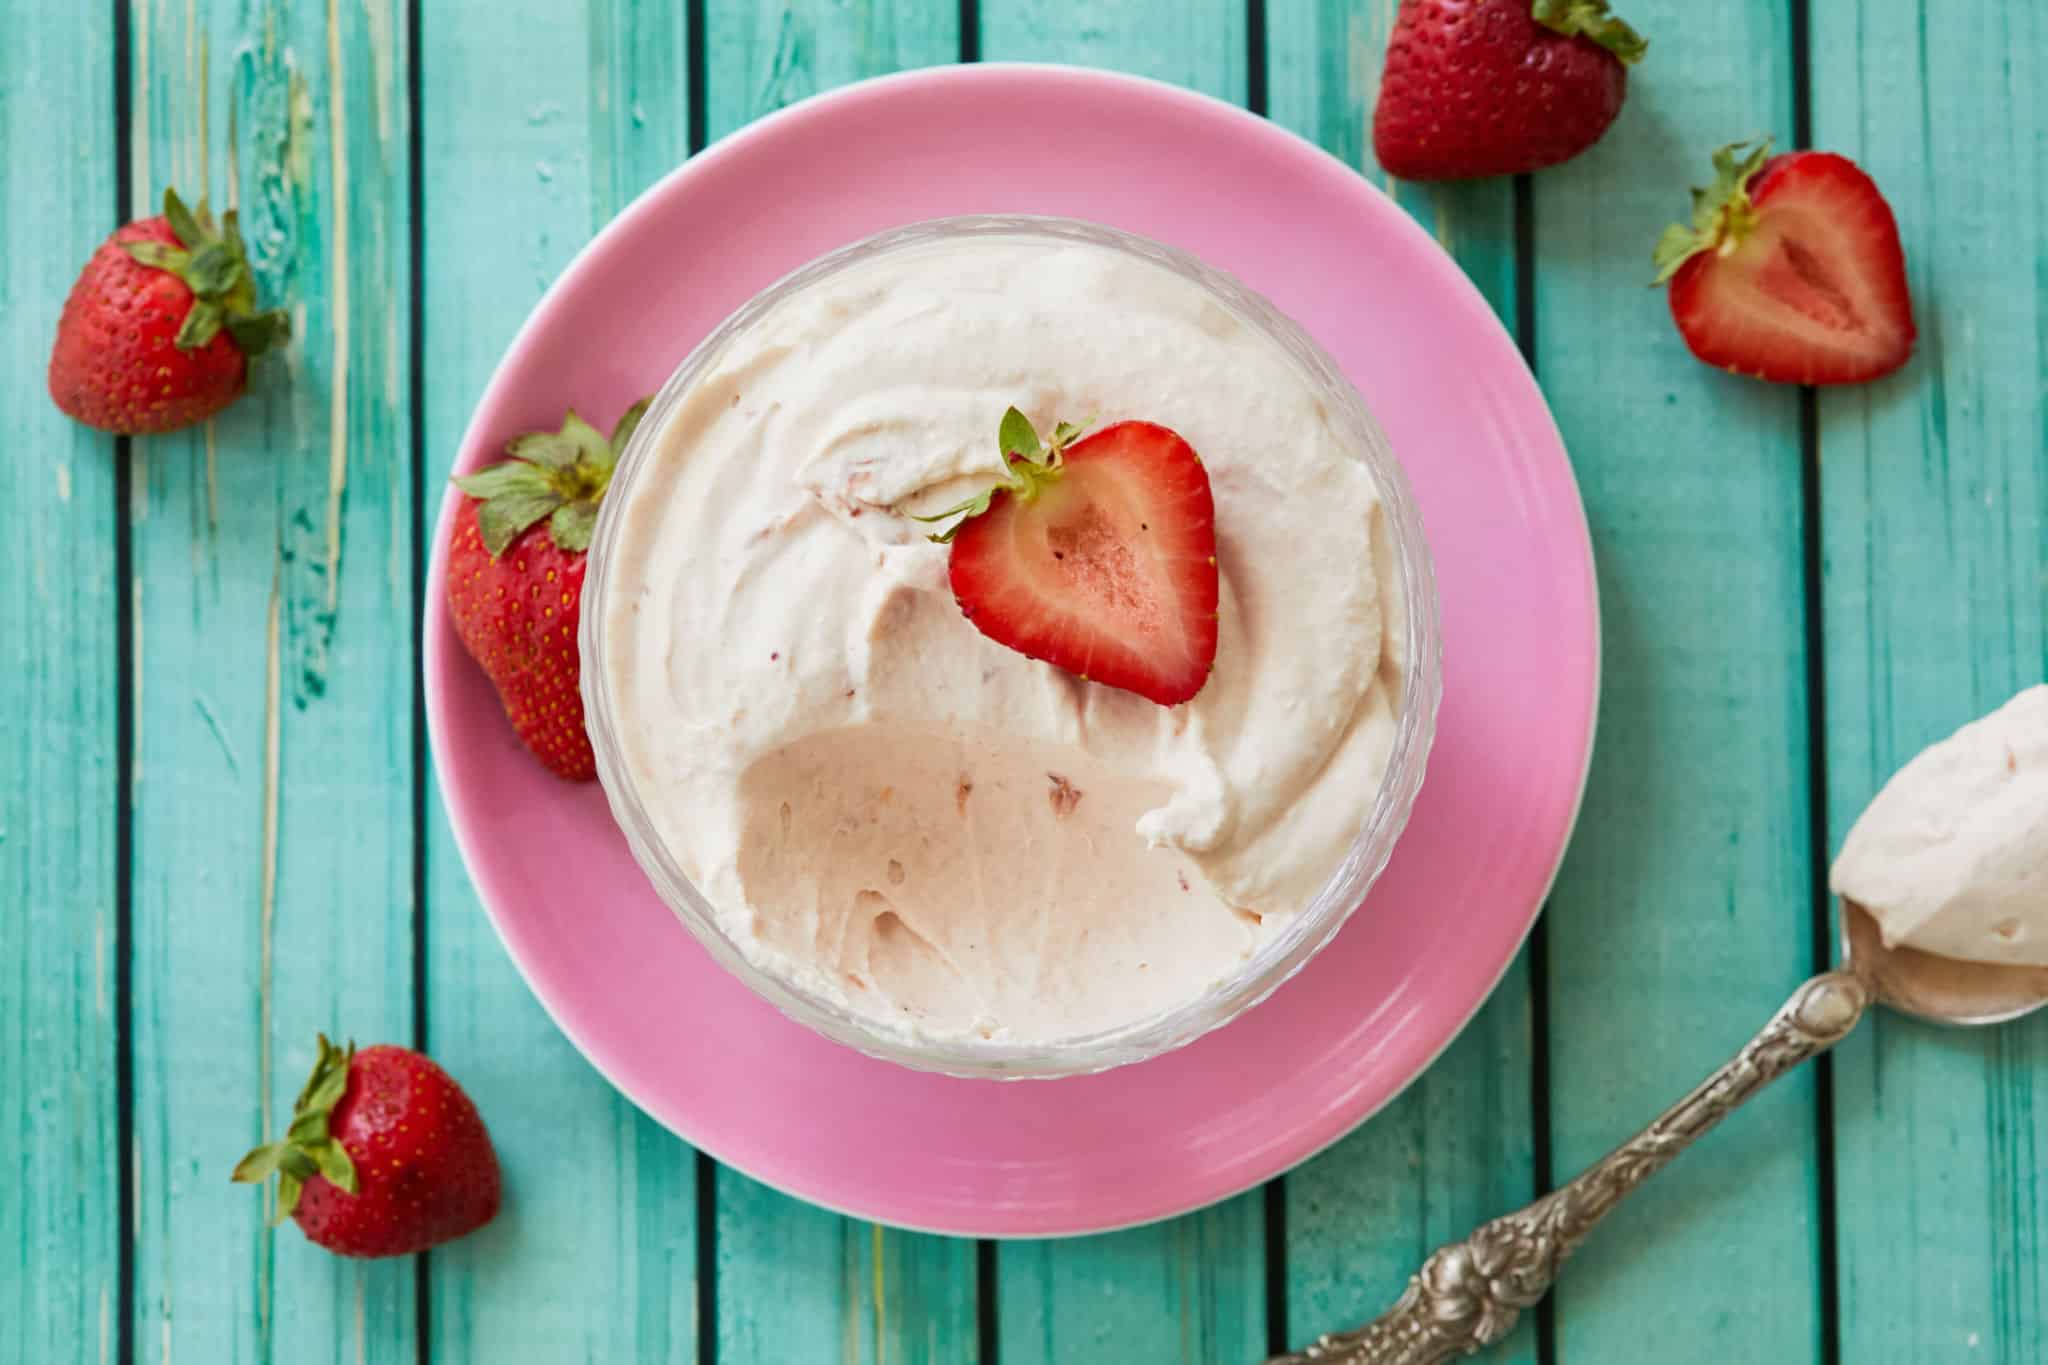 Strawberry Whipped Cream in a bowl with a strawberry on top.